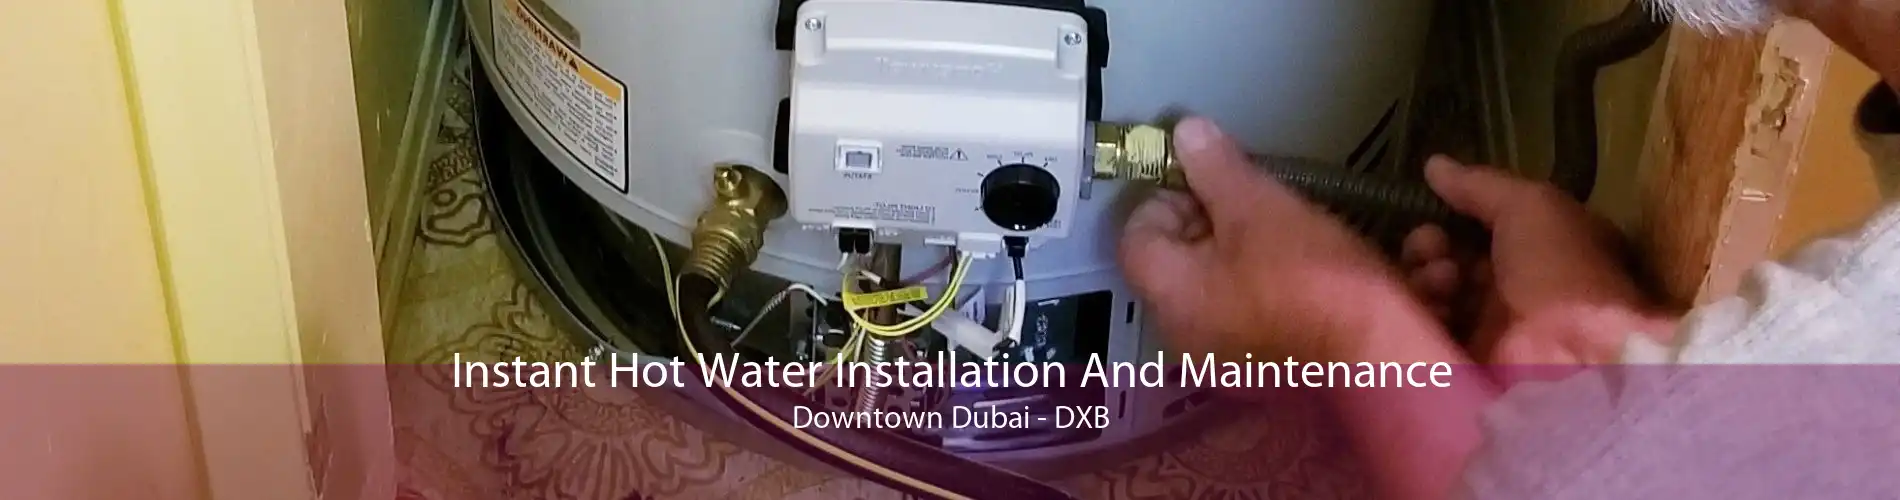 Instant Hot Water Installation And Maintenance Downtown Dubai - DXB